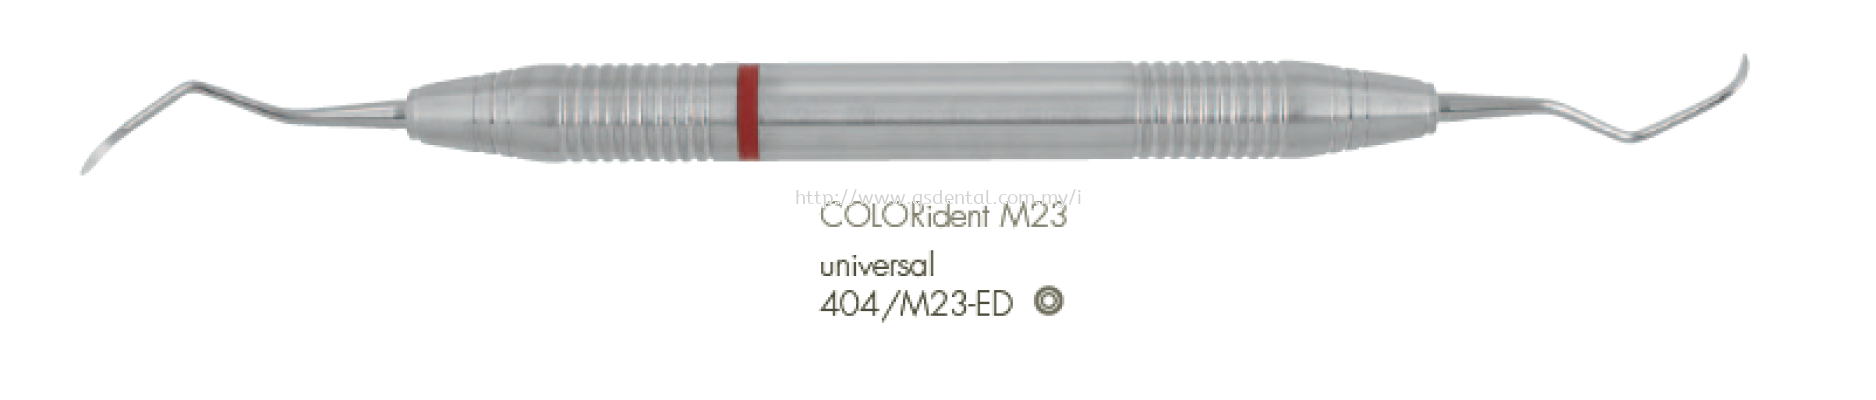 404/204SD-ED 10mm Handle With COLORident Universal No.204SD Gracey Curettes